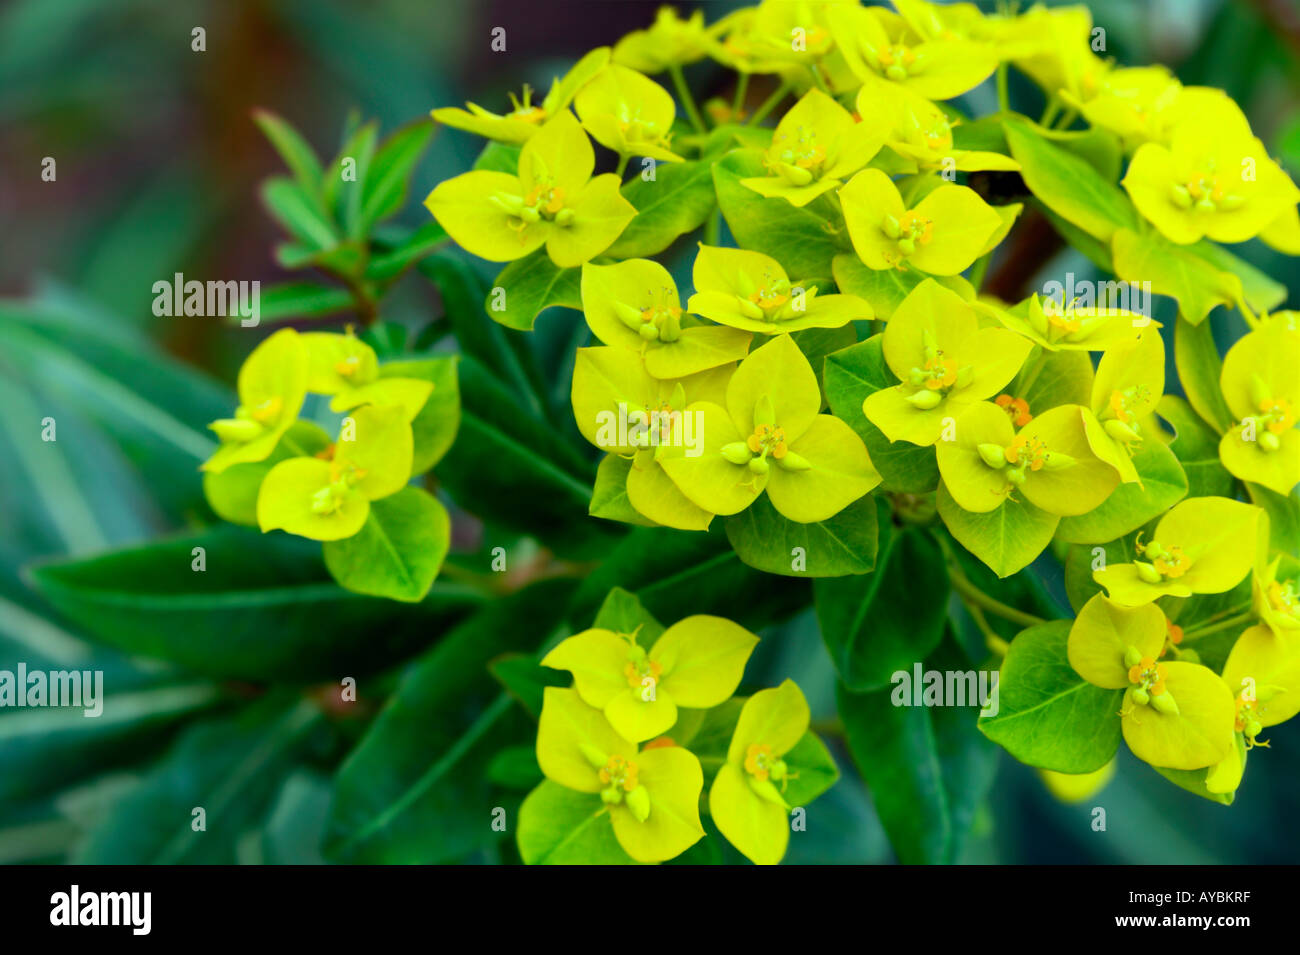 Euphorbia 'Cornigera' (commonly known as Spurge or Milkweed). Bright yellow-green bracts in July, Oxfordshire UK Stock Photo